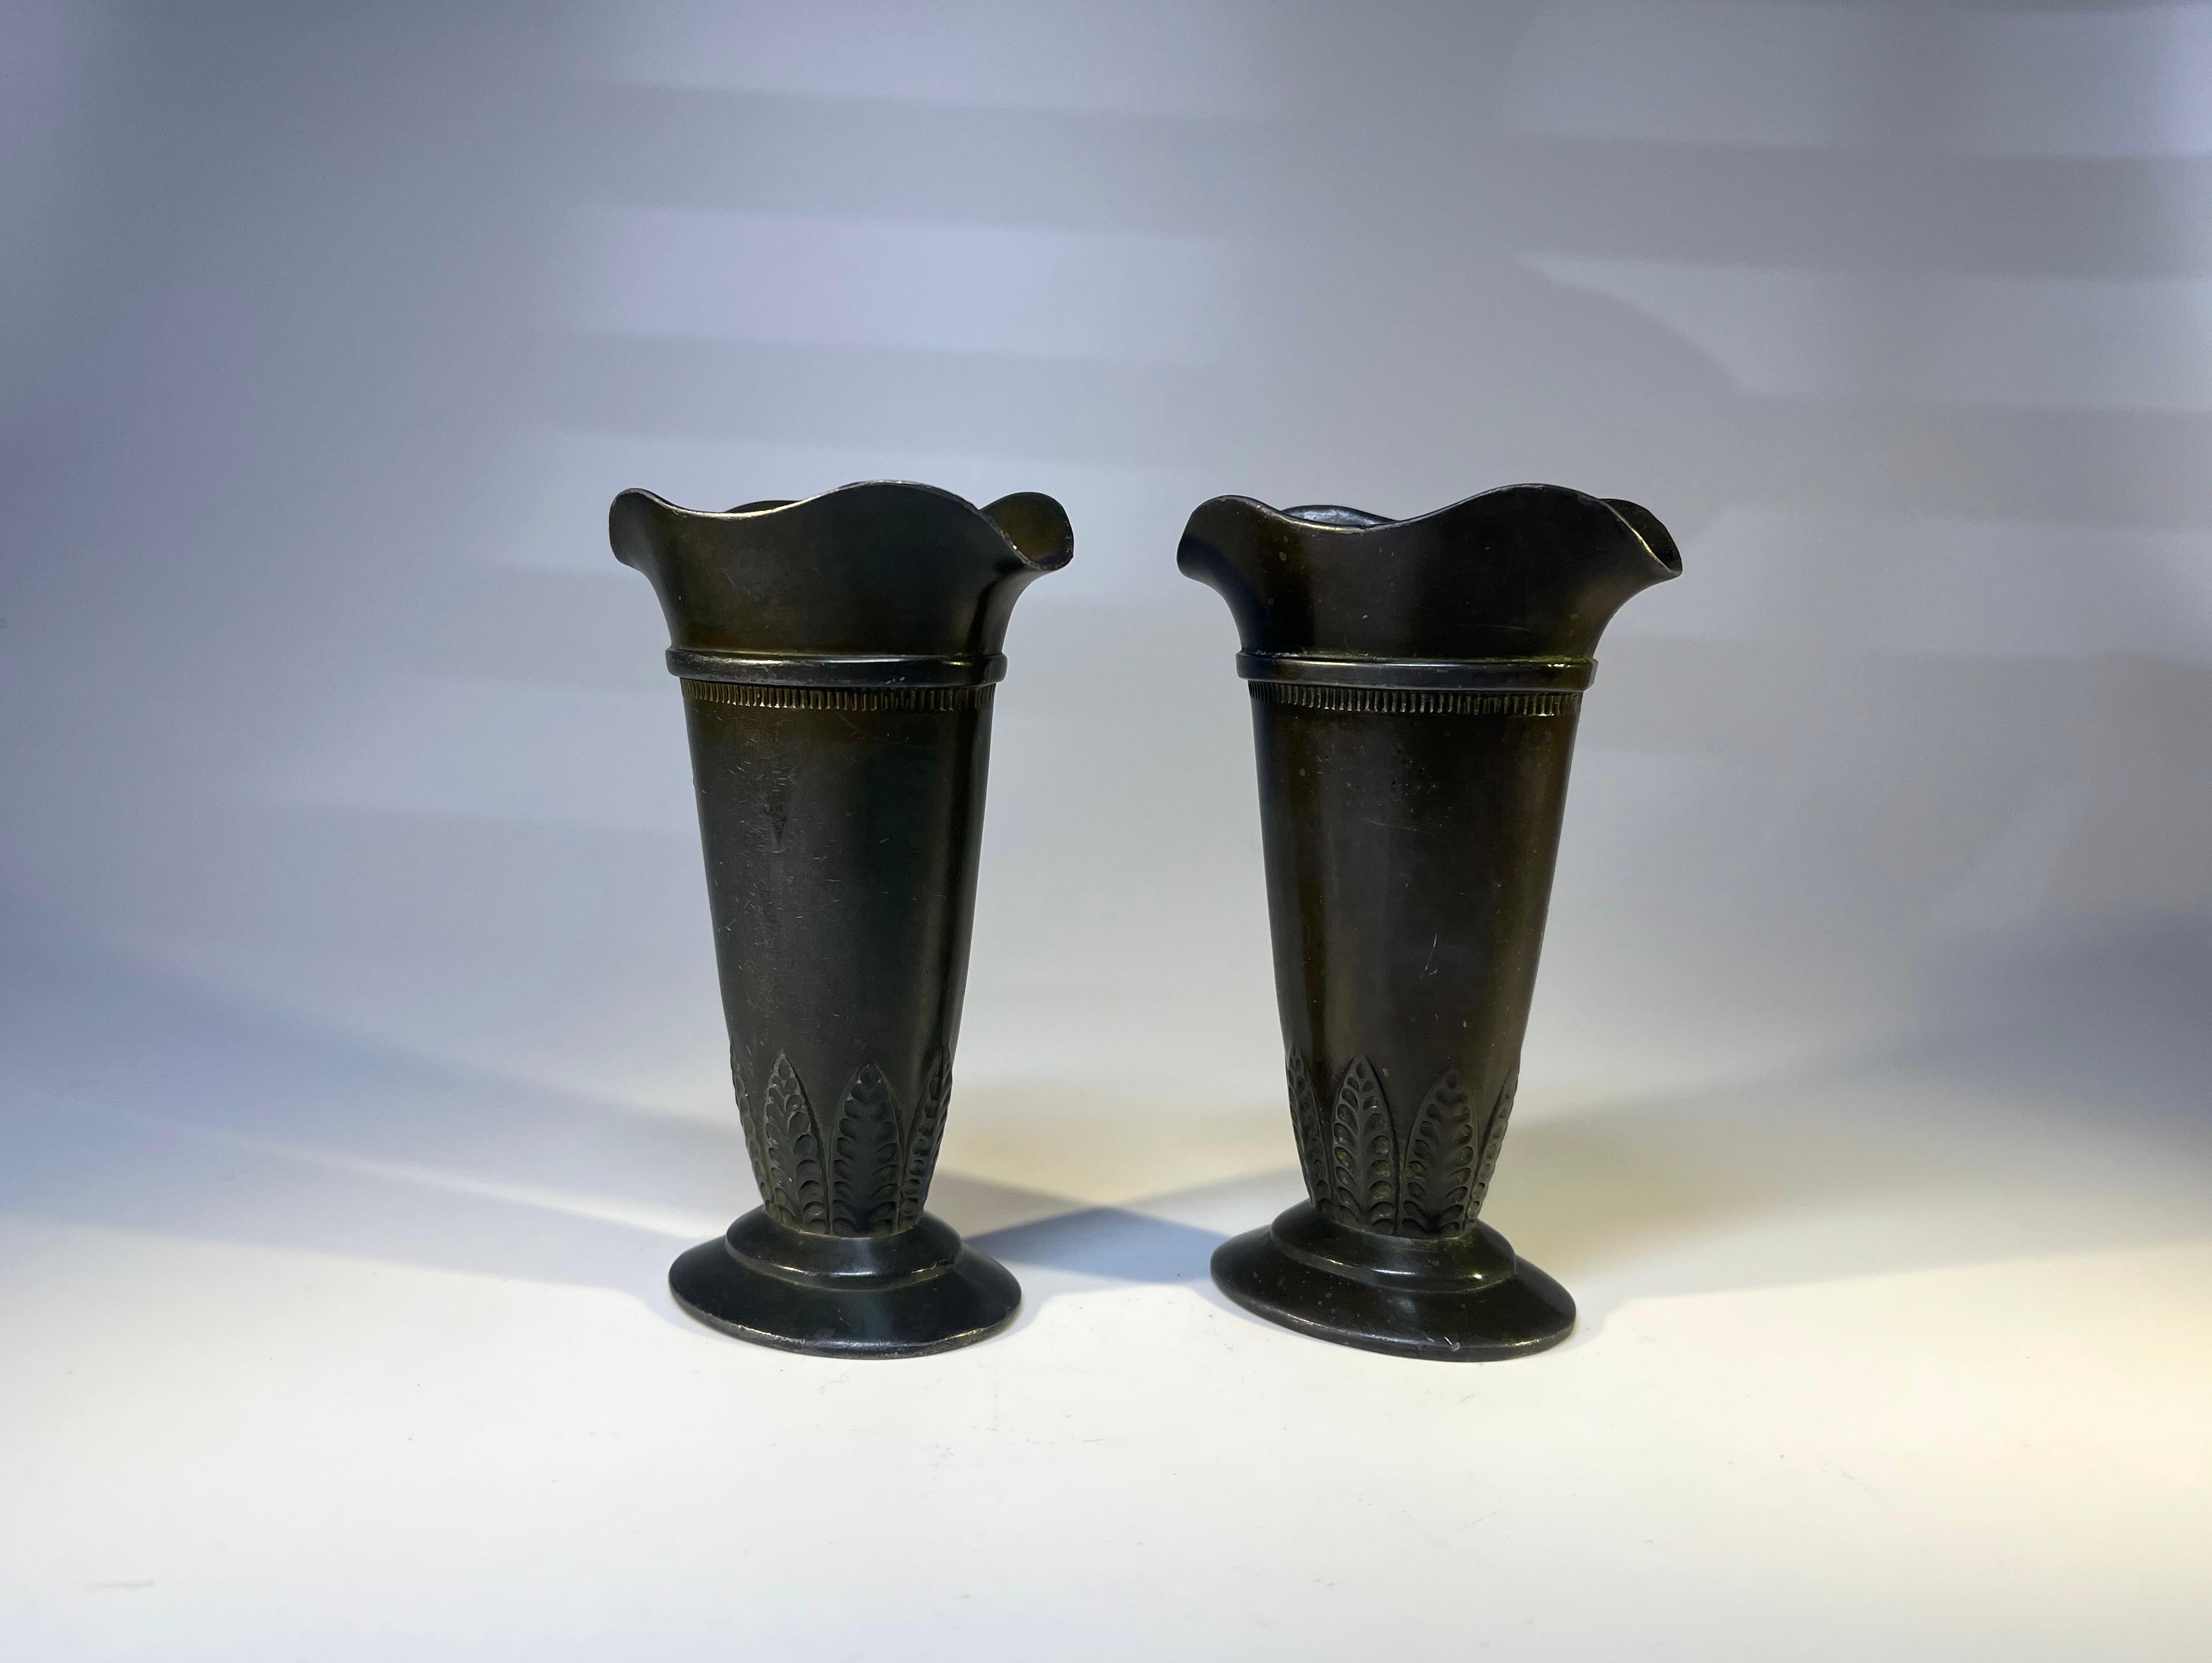 Pair of diminutive Just Andersen Disko metal flared flower vases with rich patina
Delicate in design and particularly decorated at base with stylised leaves
Stamped and numbered D55 to bases
Circa 1930's
Height 3.75 inch, Width 2.5 inch, Depth